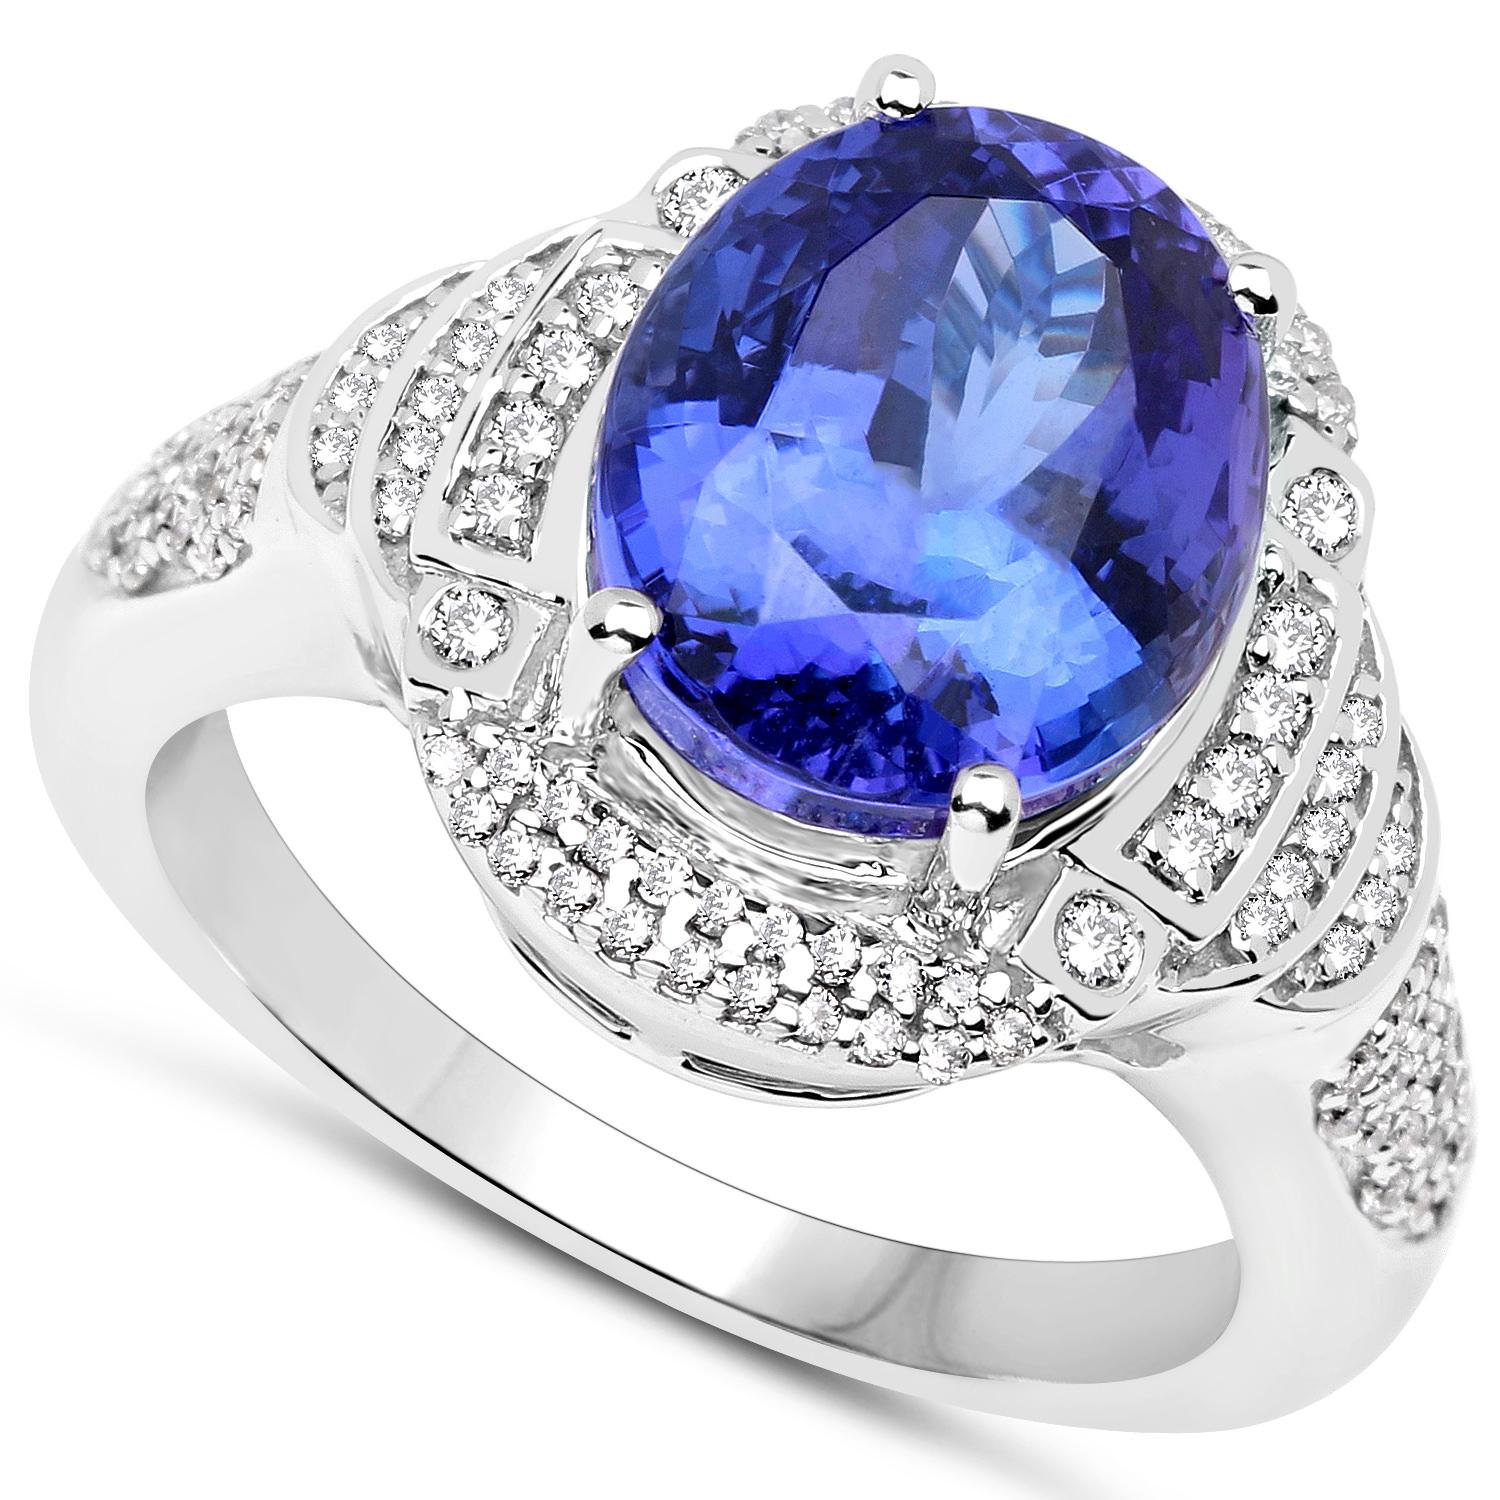 It comes with the appraisal by GIA GG/AJP
Tanzanite = 6.05 Carat (12 x 10 mm)
Cut: Oval
Diamonds = 0.40 Carats
Diamonds Quantity: 118
Metal: 14K White Gold
Ring Size: 7* US
*It can be resized complimentary